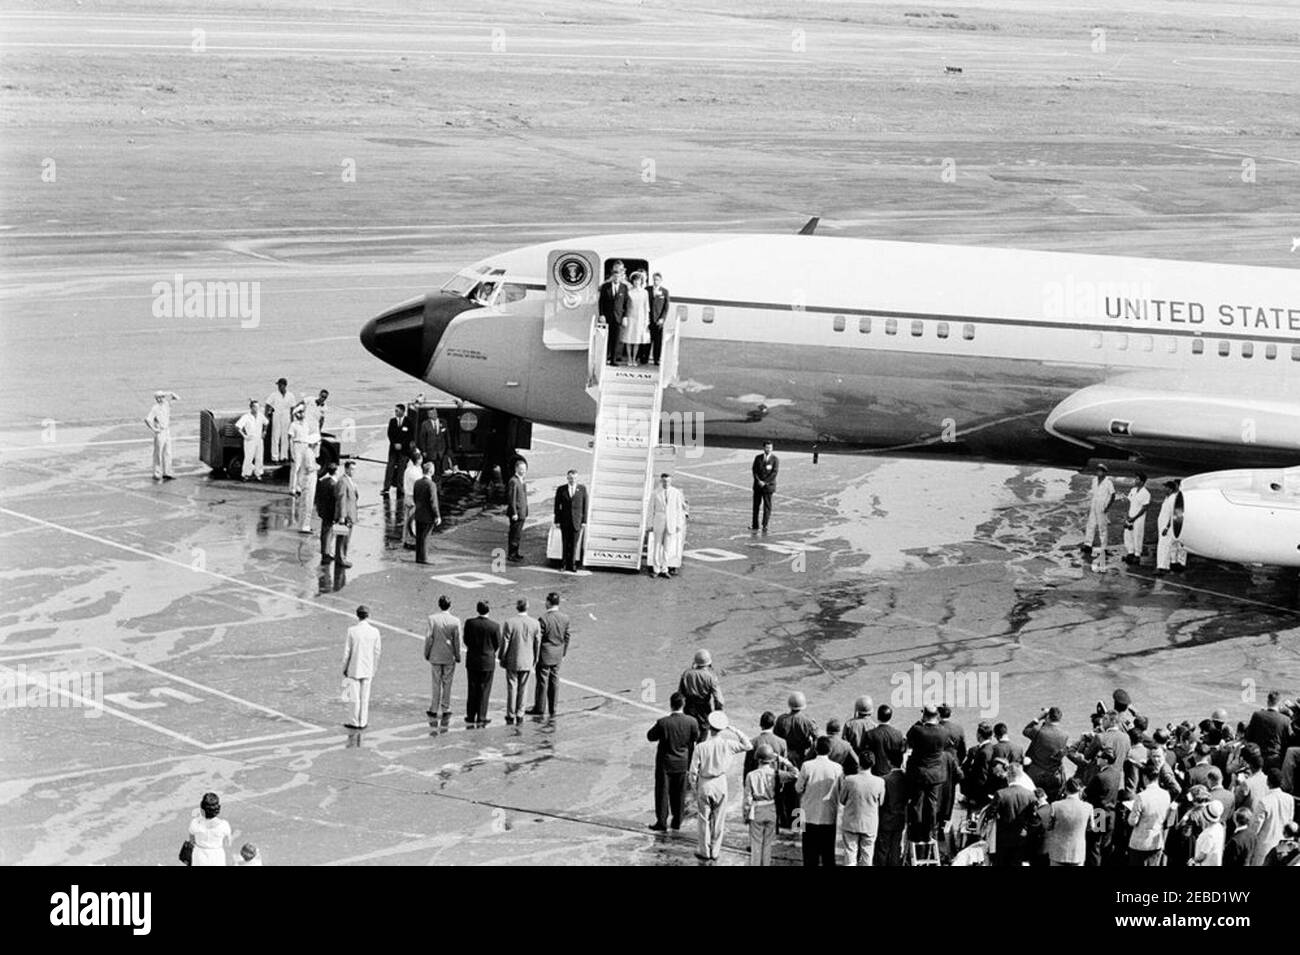 Trip to South America: Caracas, Venezuela, arrival, 9:00AM. President John F. Kennedy and First Lady Jacqueline Kennedy prepare to step off Air Force One upon their arrival at Maiquetu00eda International Airport, Caracas, Venezuela. Stock Photo